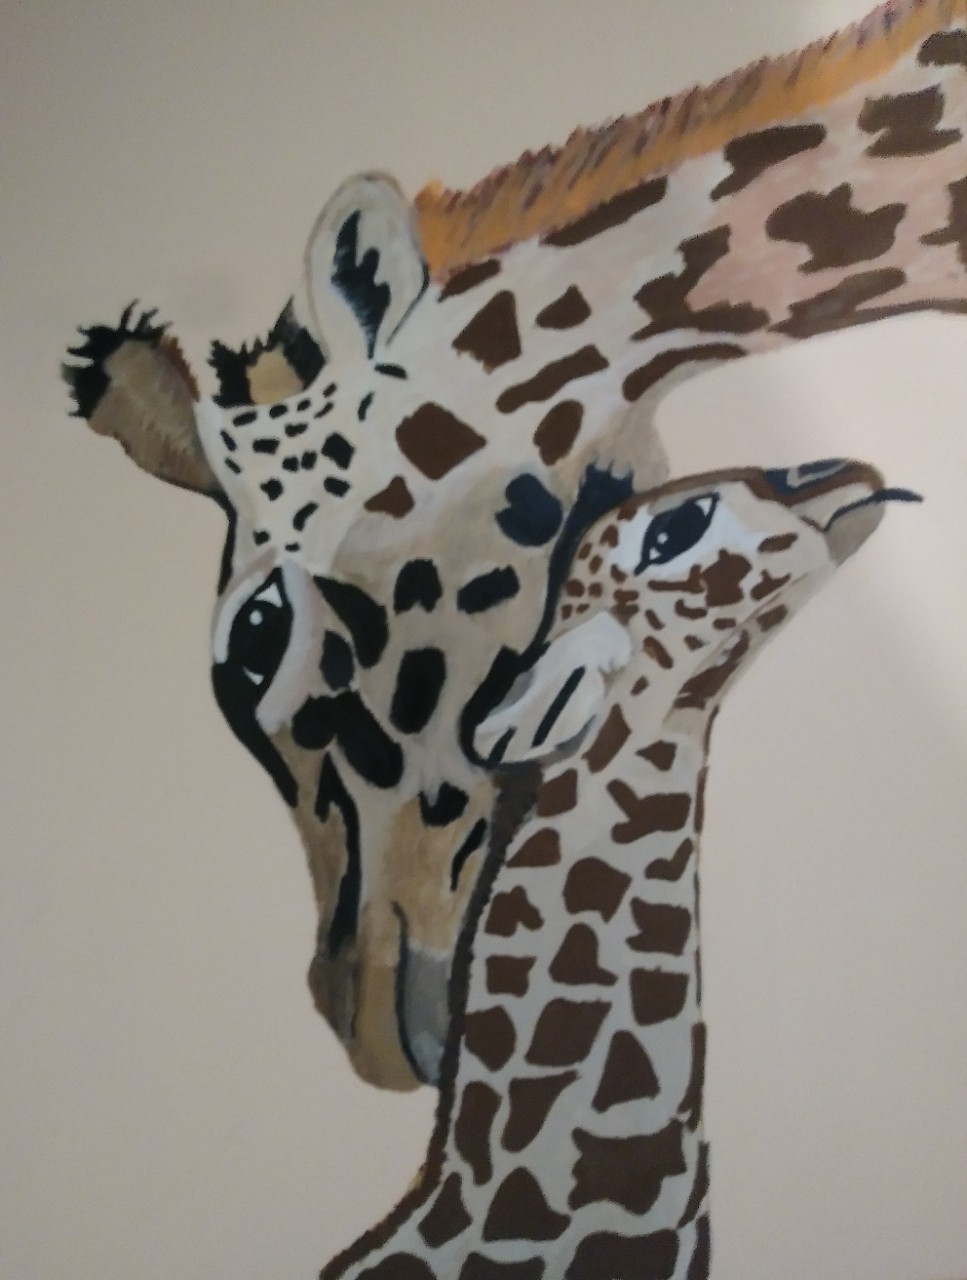 A realistic-looking drawing or painting of a larger parent giraffe reaching its head down to nuzzle the head of a smaller baby giraffe. 